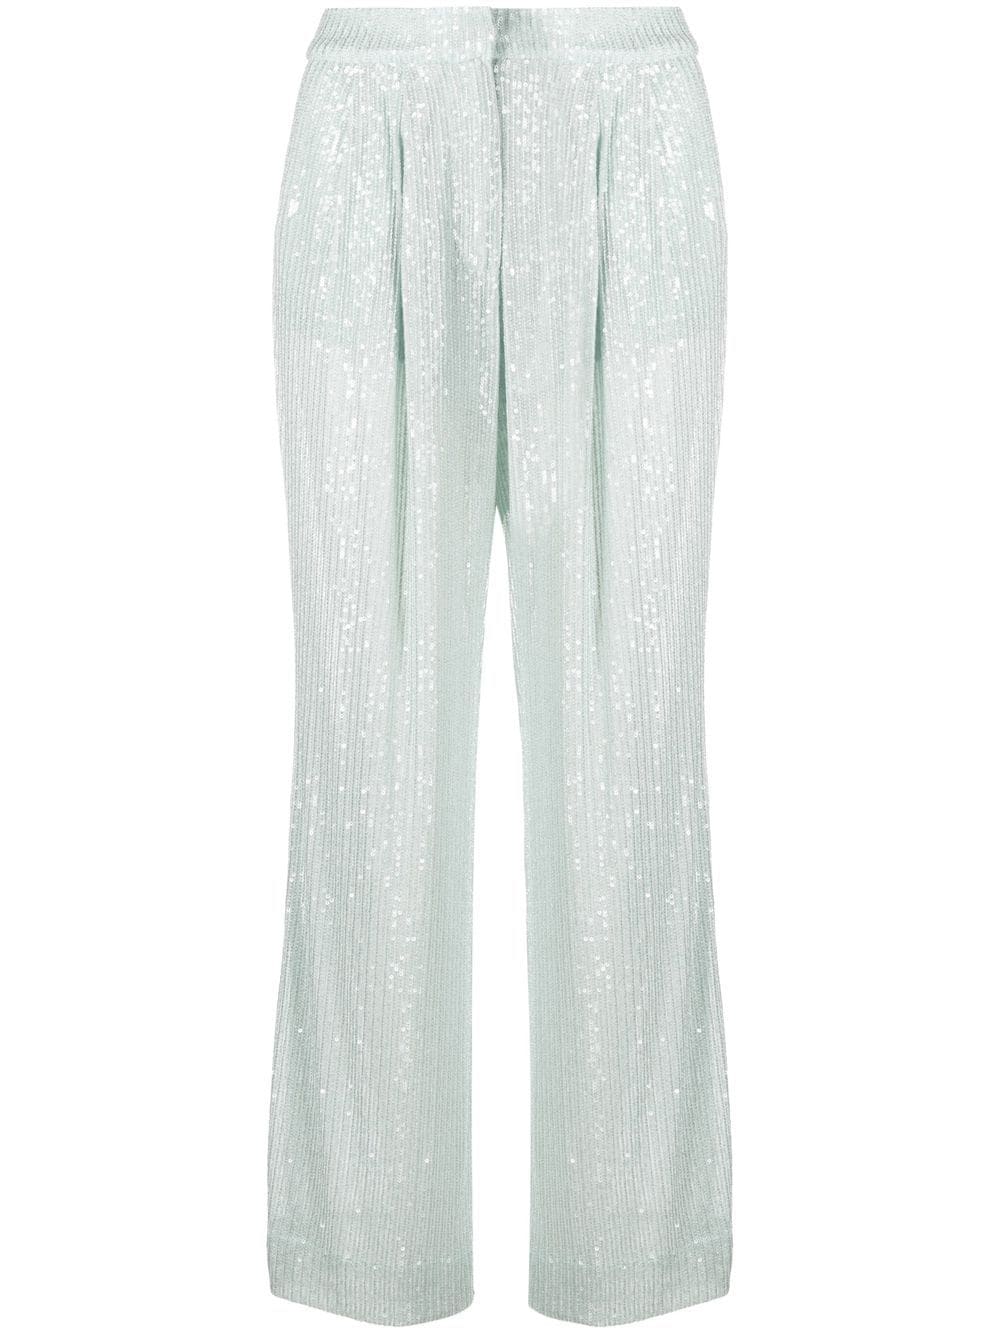 sequin-embellished trousers